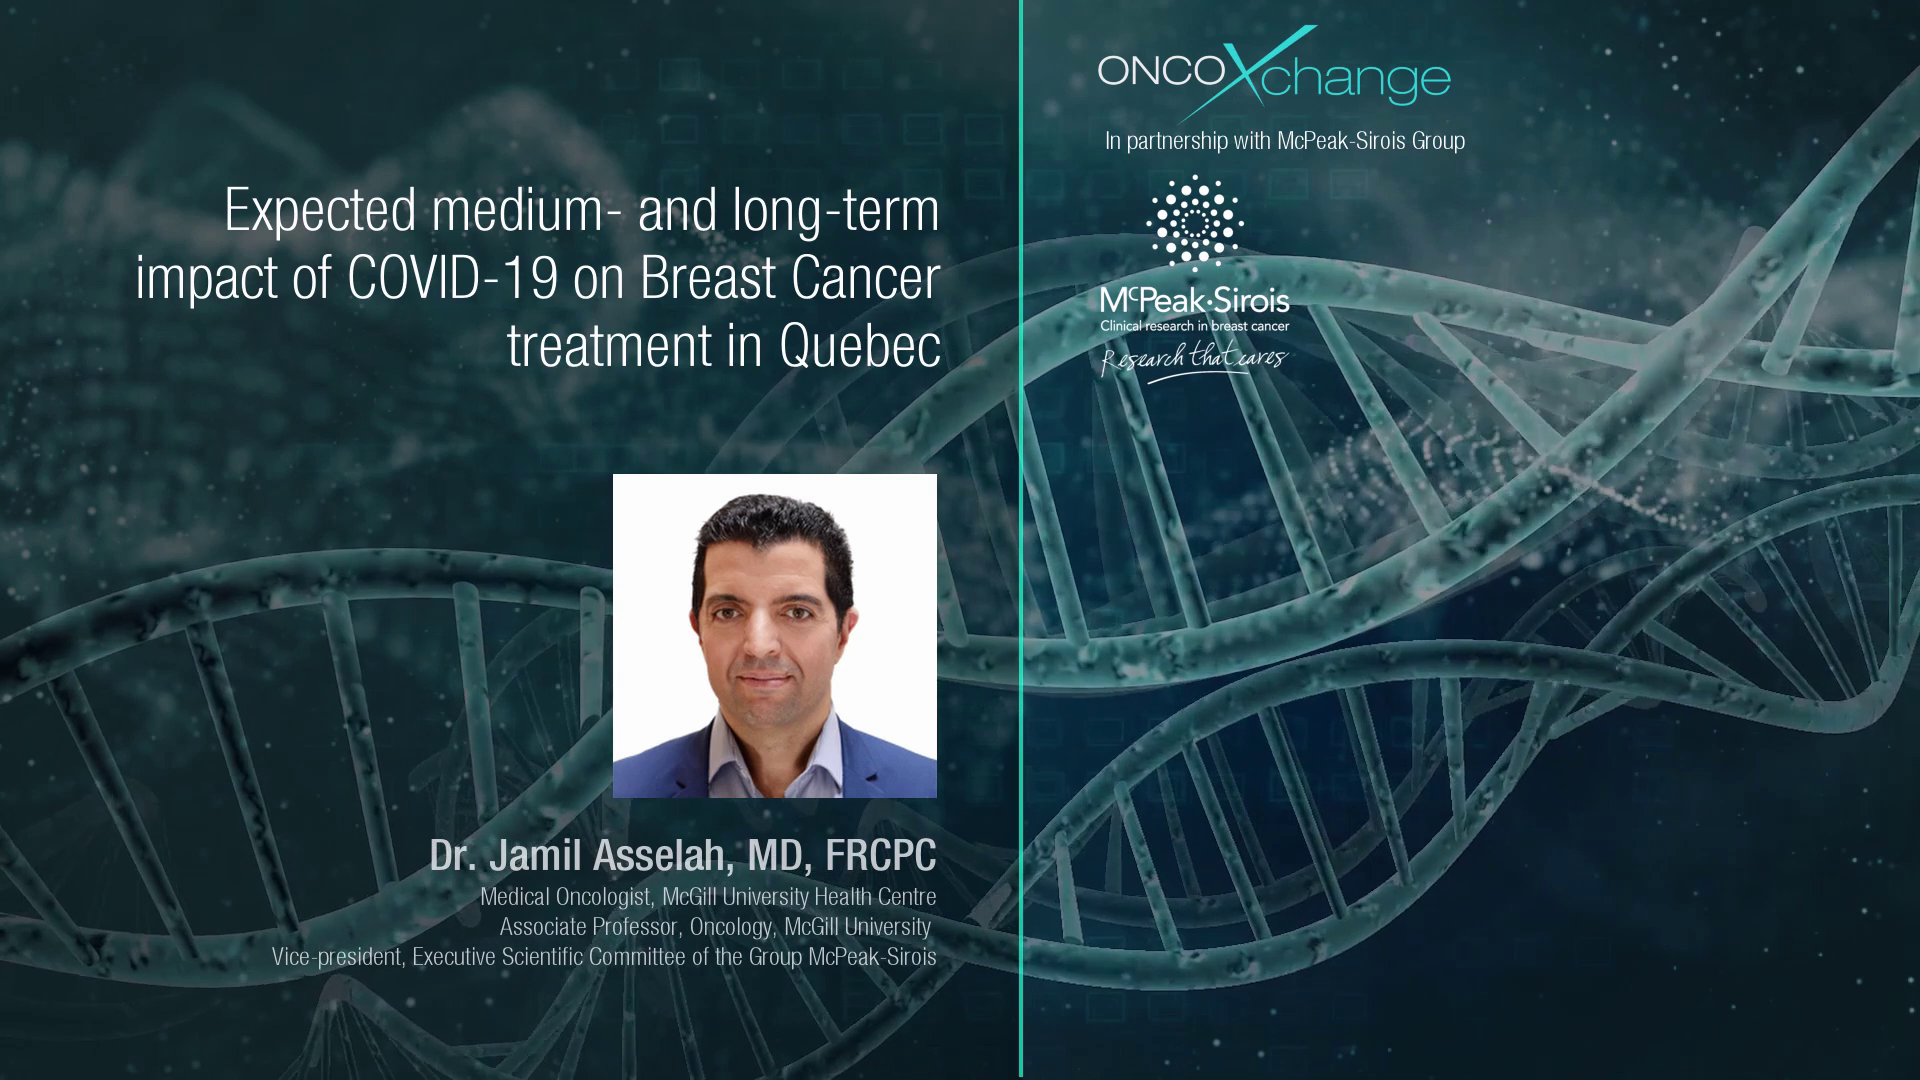 Expected medium- and long-term impact of the COVID-19 on Breast Cancer Treatment in Quebec